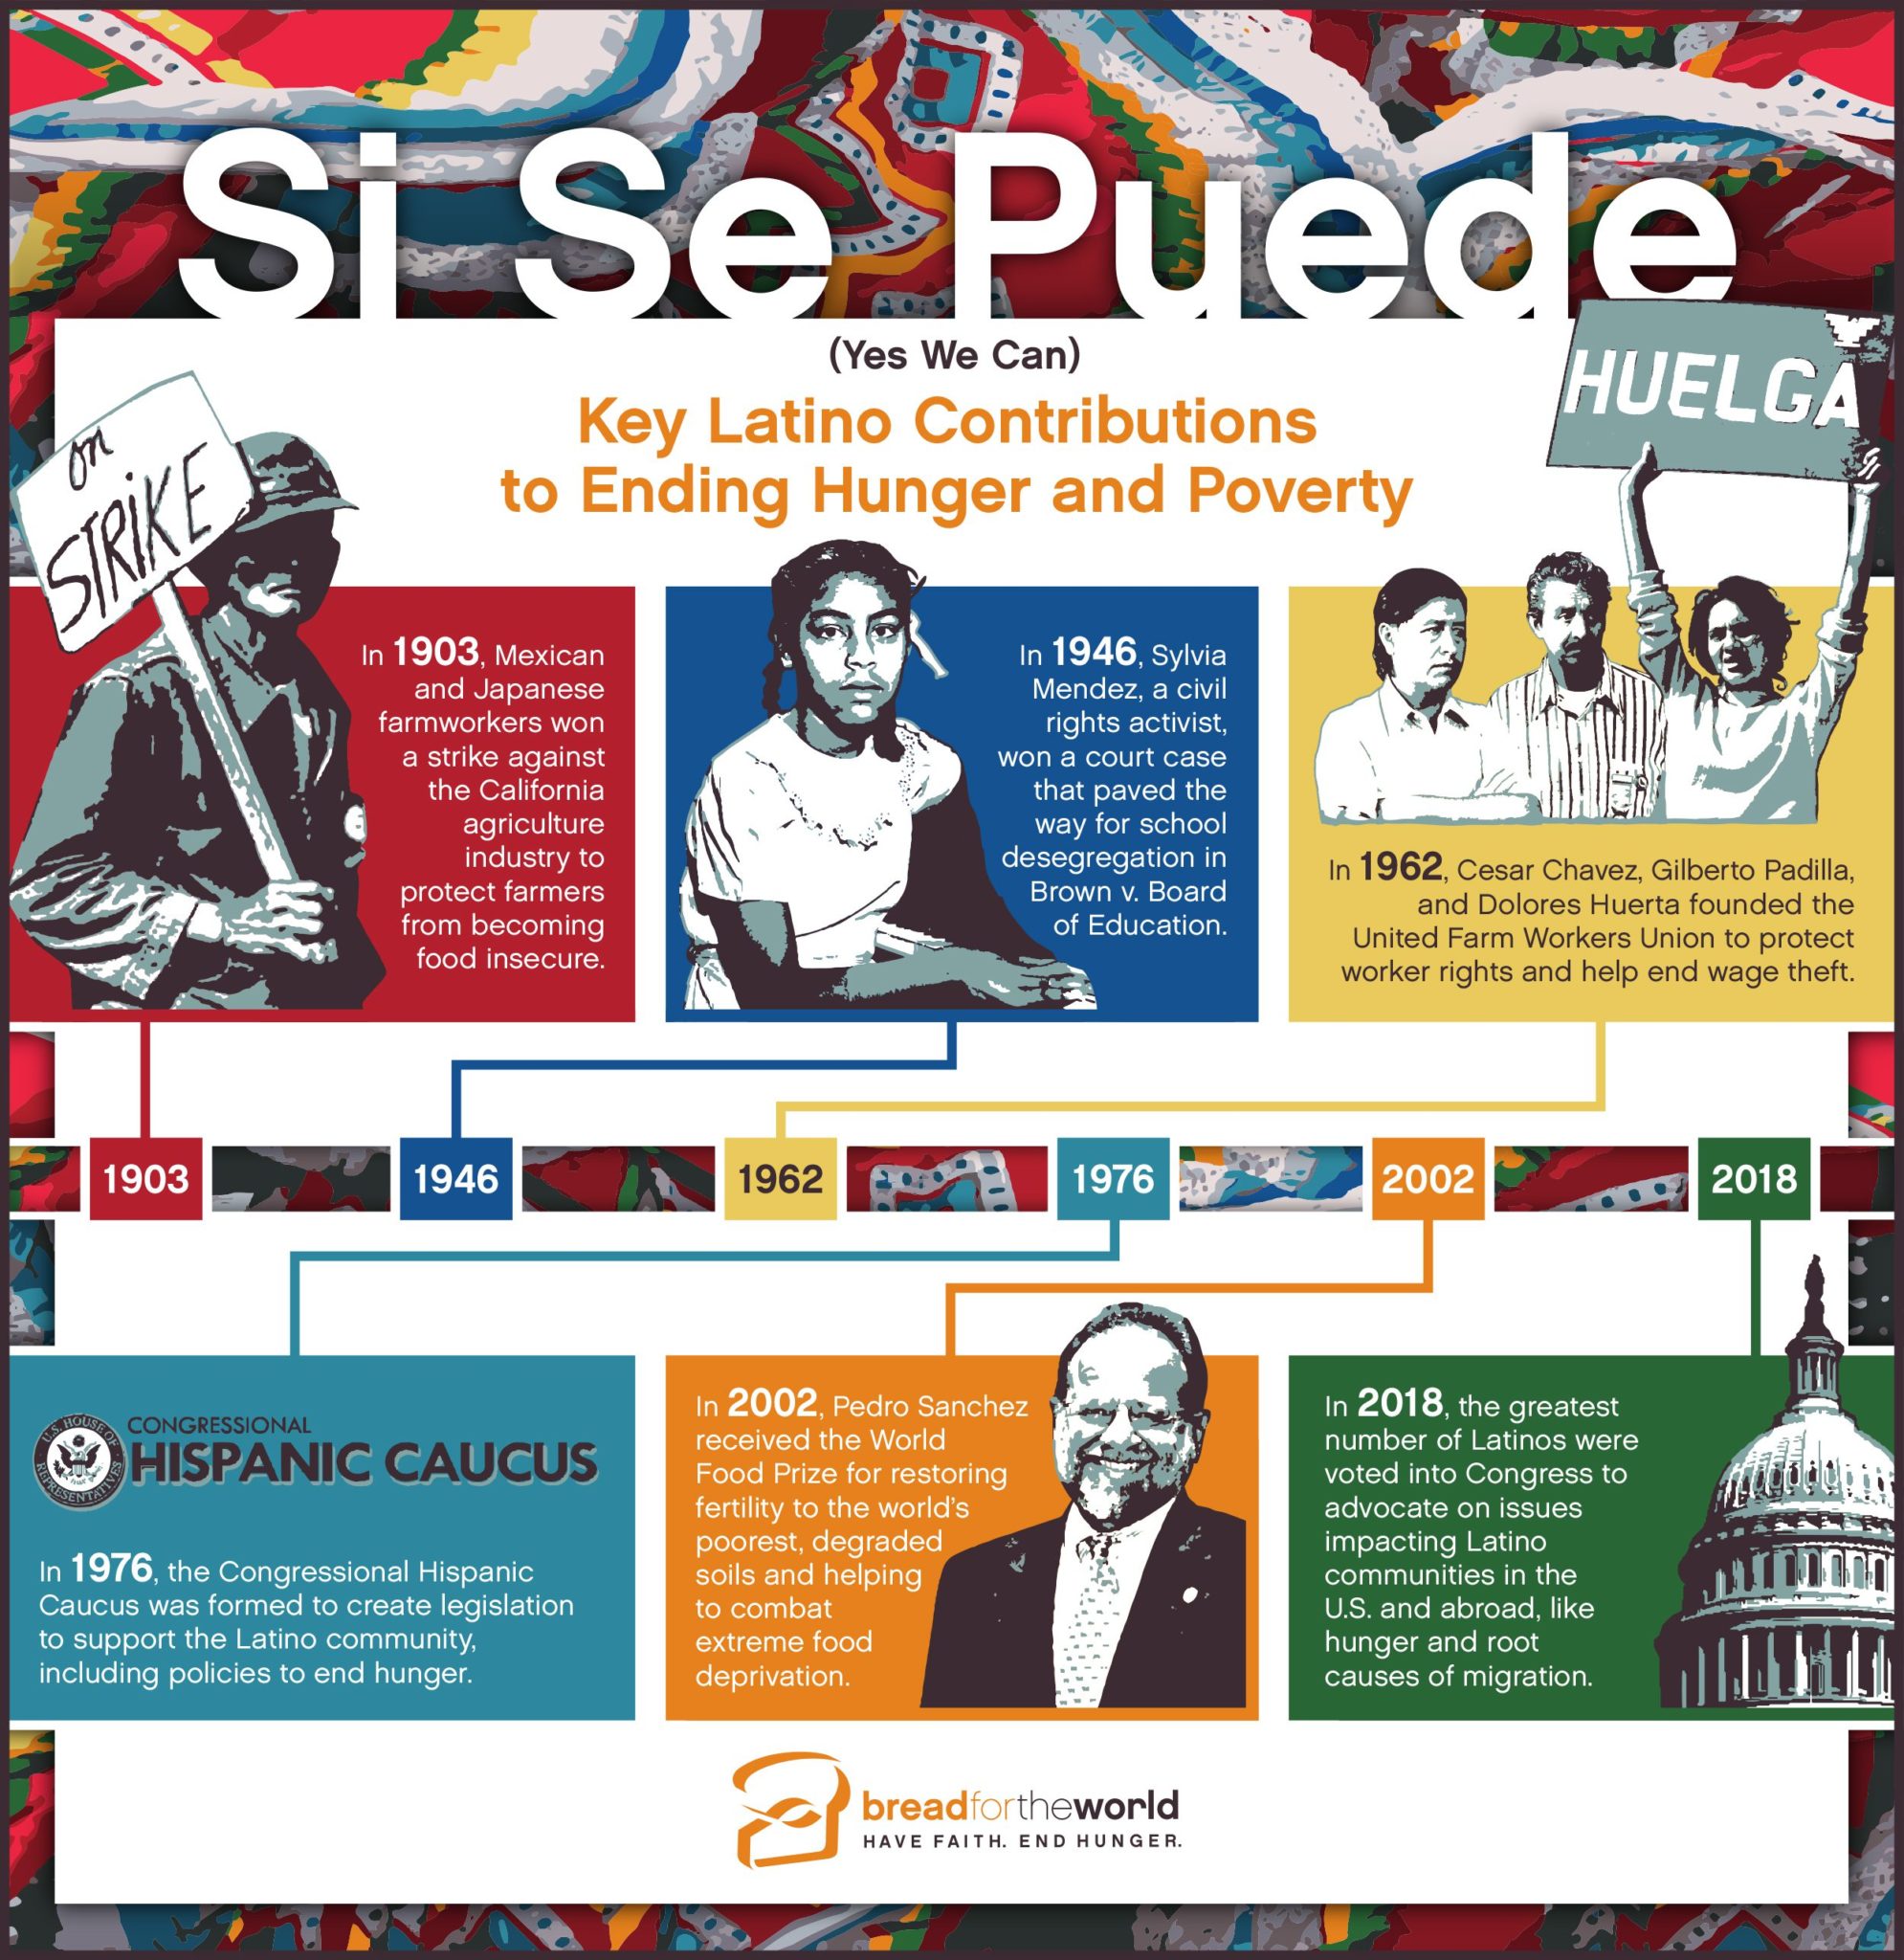 Infographic: Key Latino Contributions to Ending Hunger and Poverty